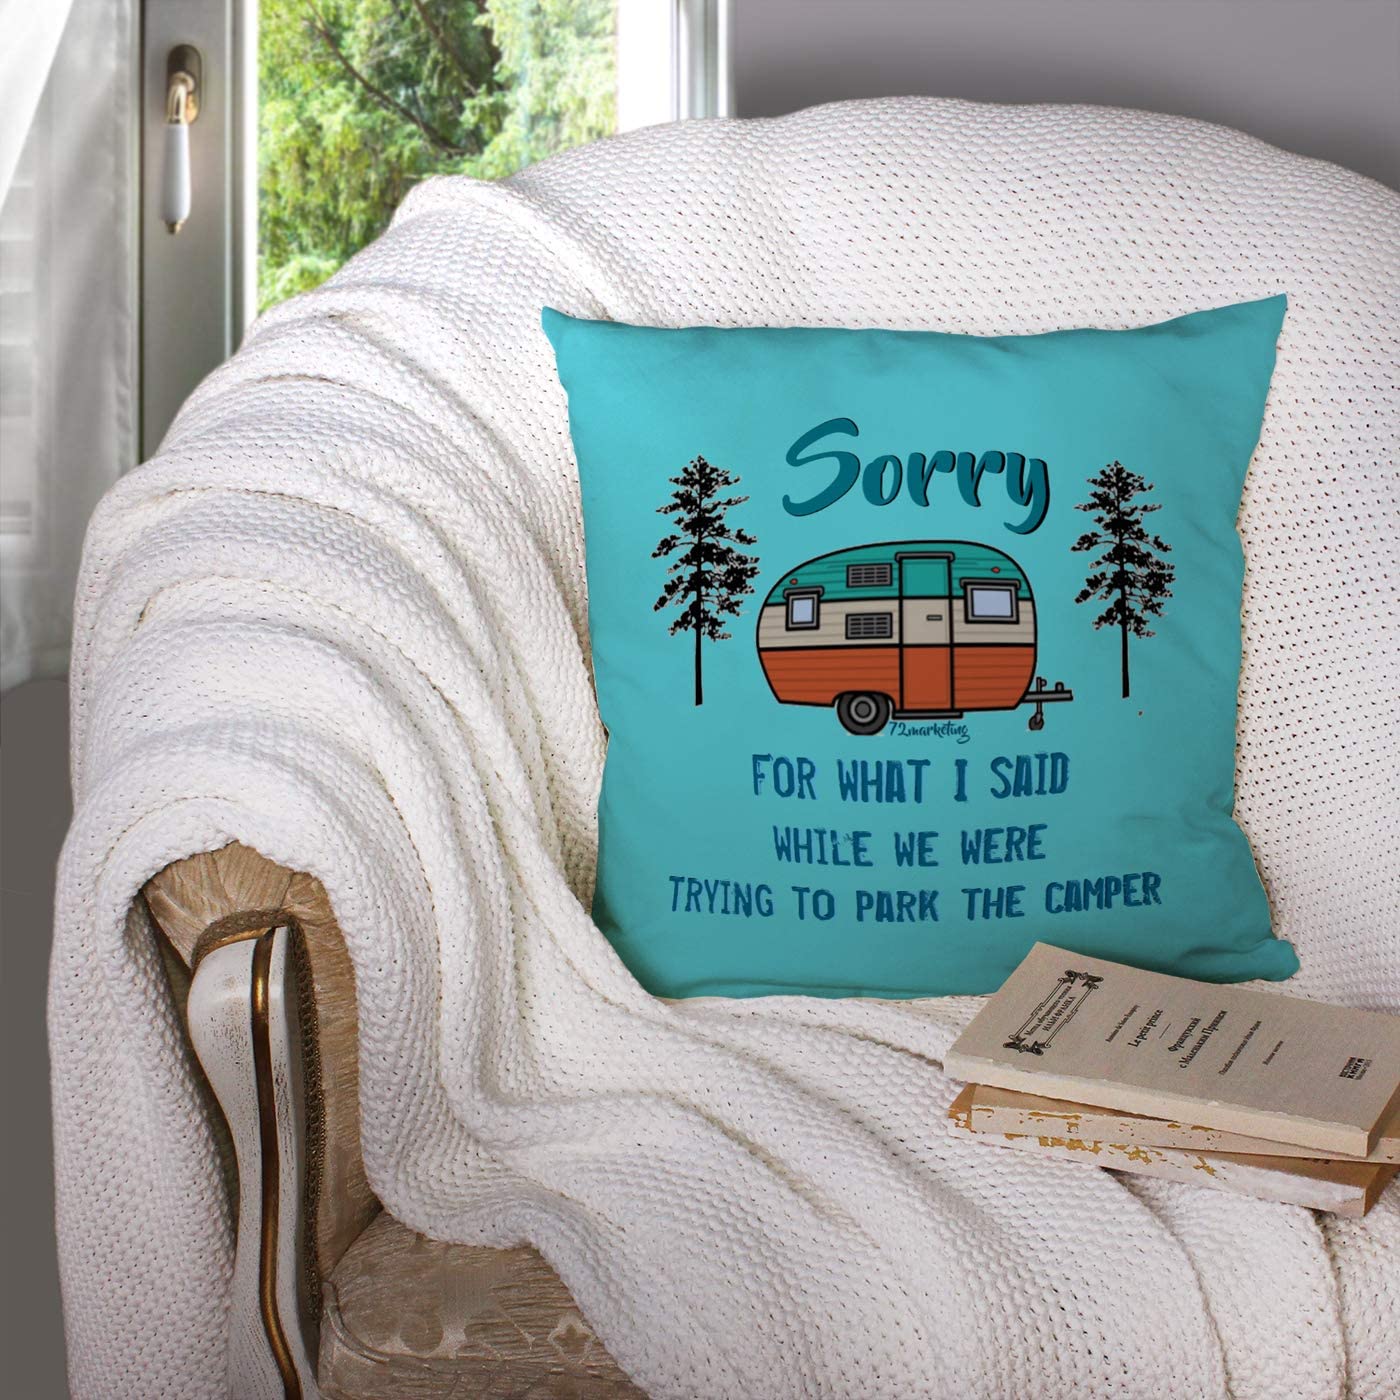 Decorative Pillowcase Covers for the Campervan